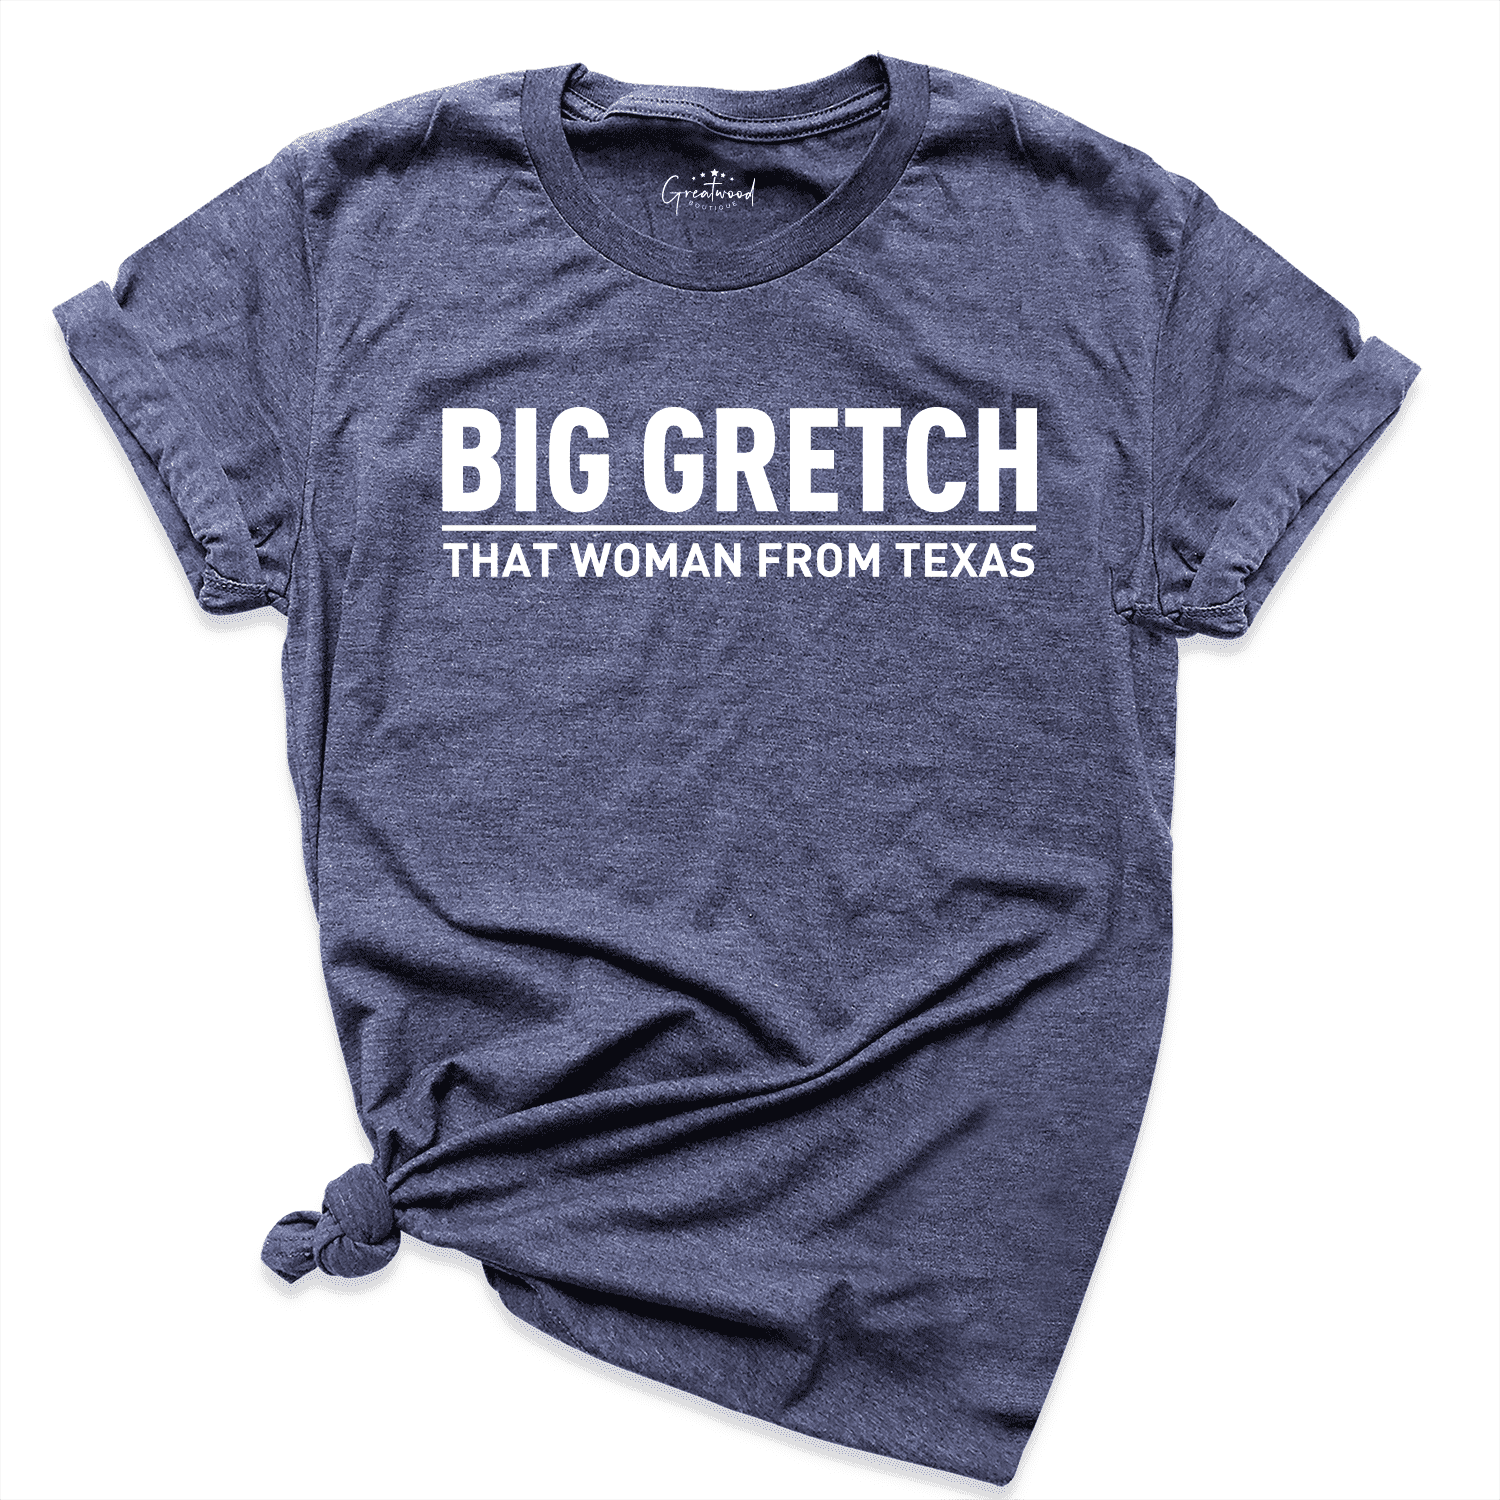 Big Gretch Woman Shirt Navy - Greatwood Boutique